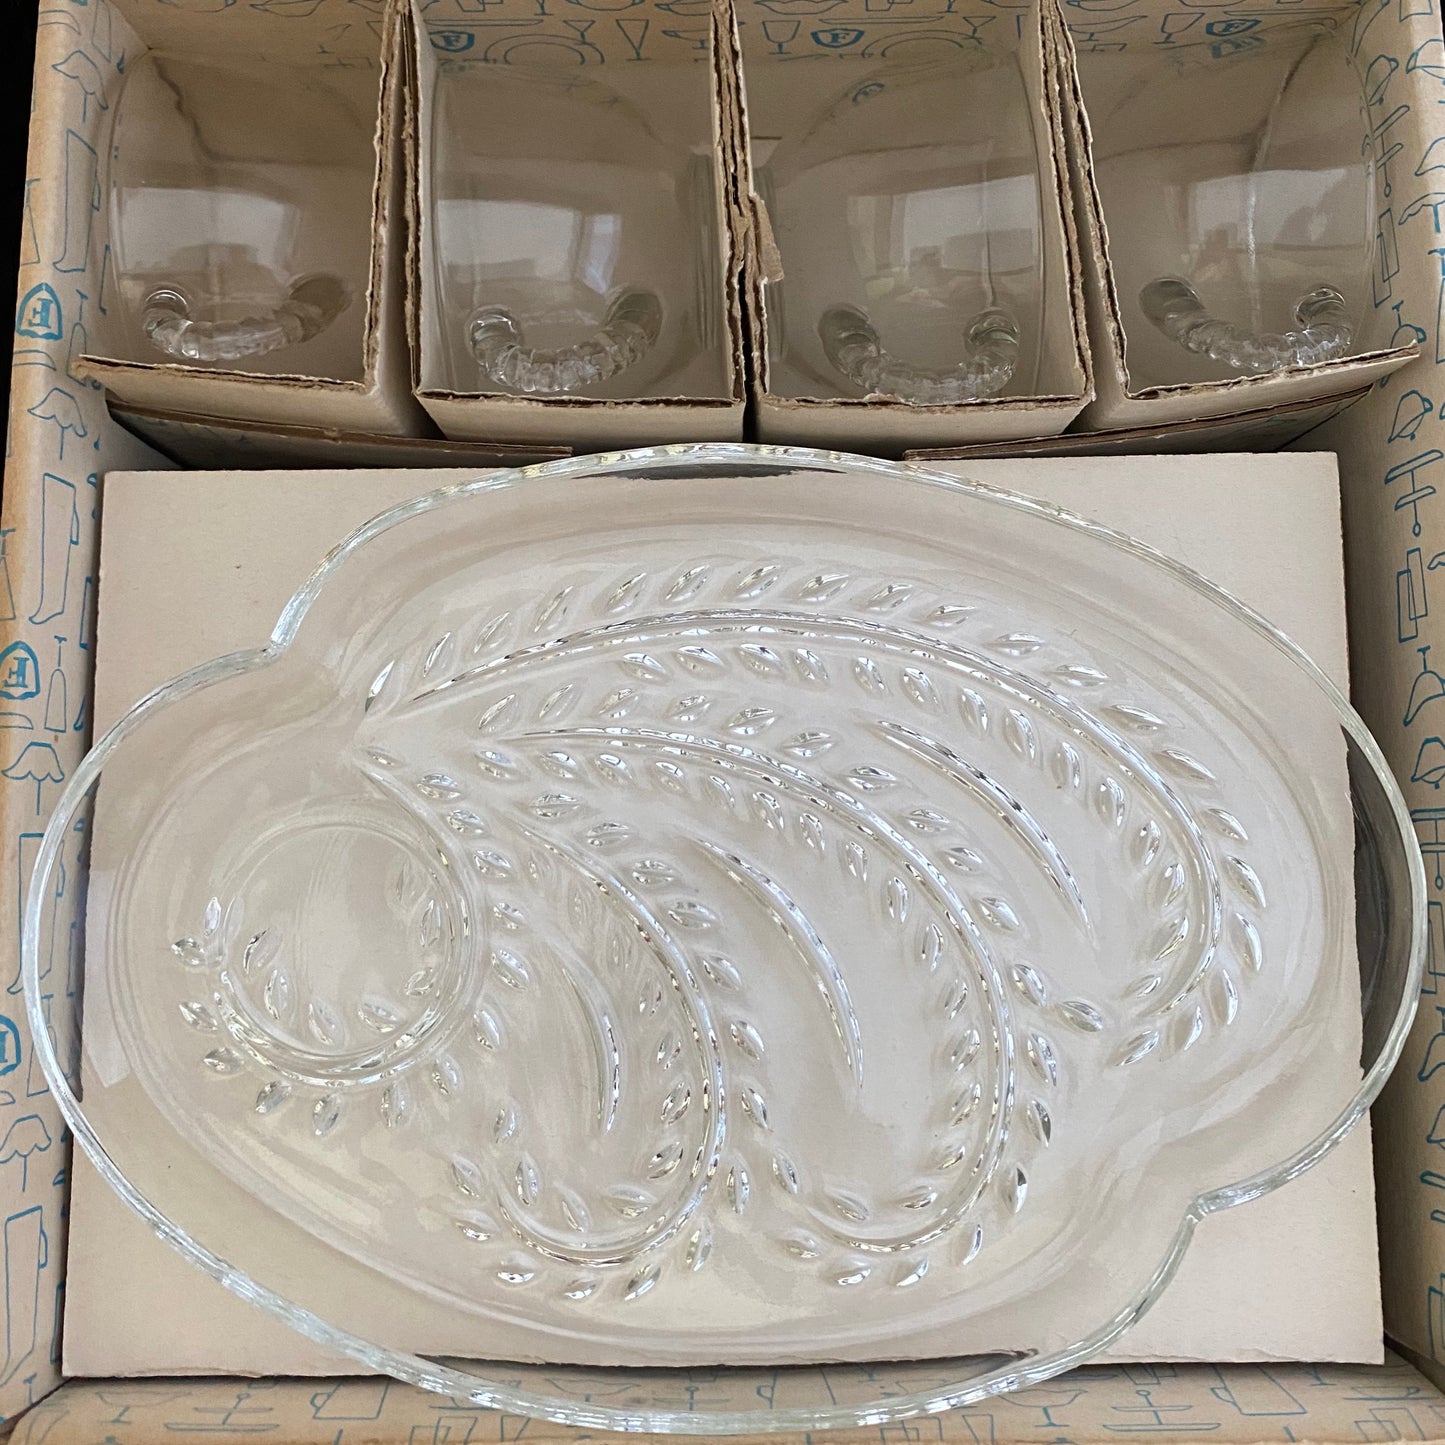 1950s Federal Glass, Homestead Snack Set